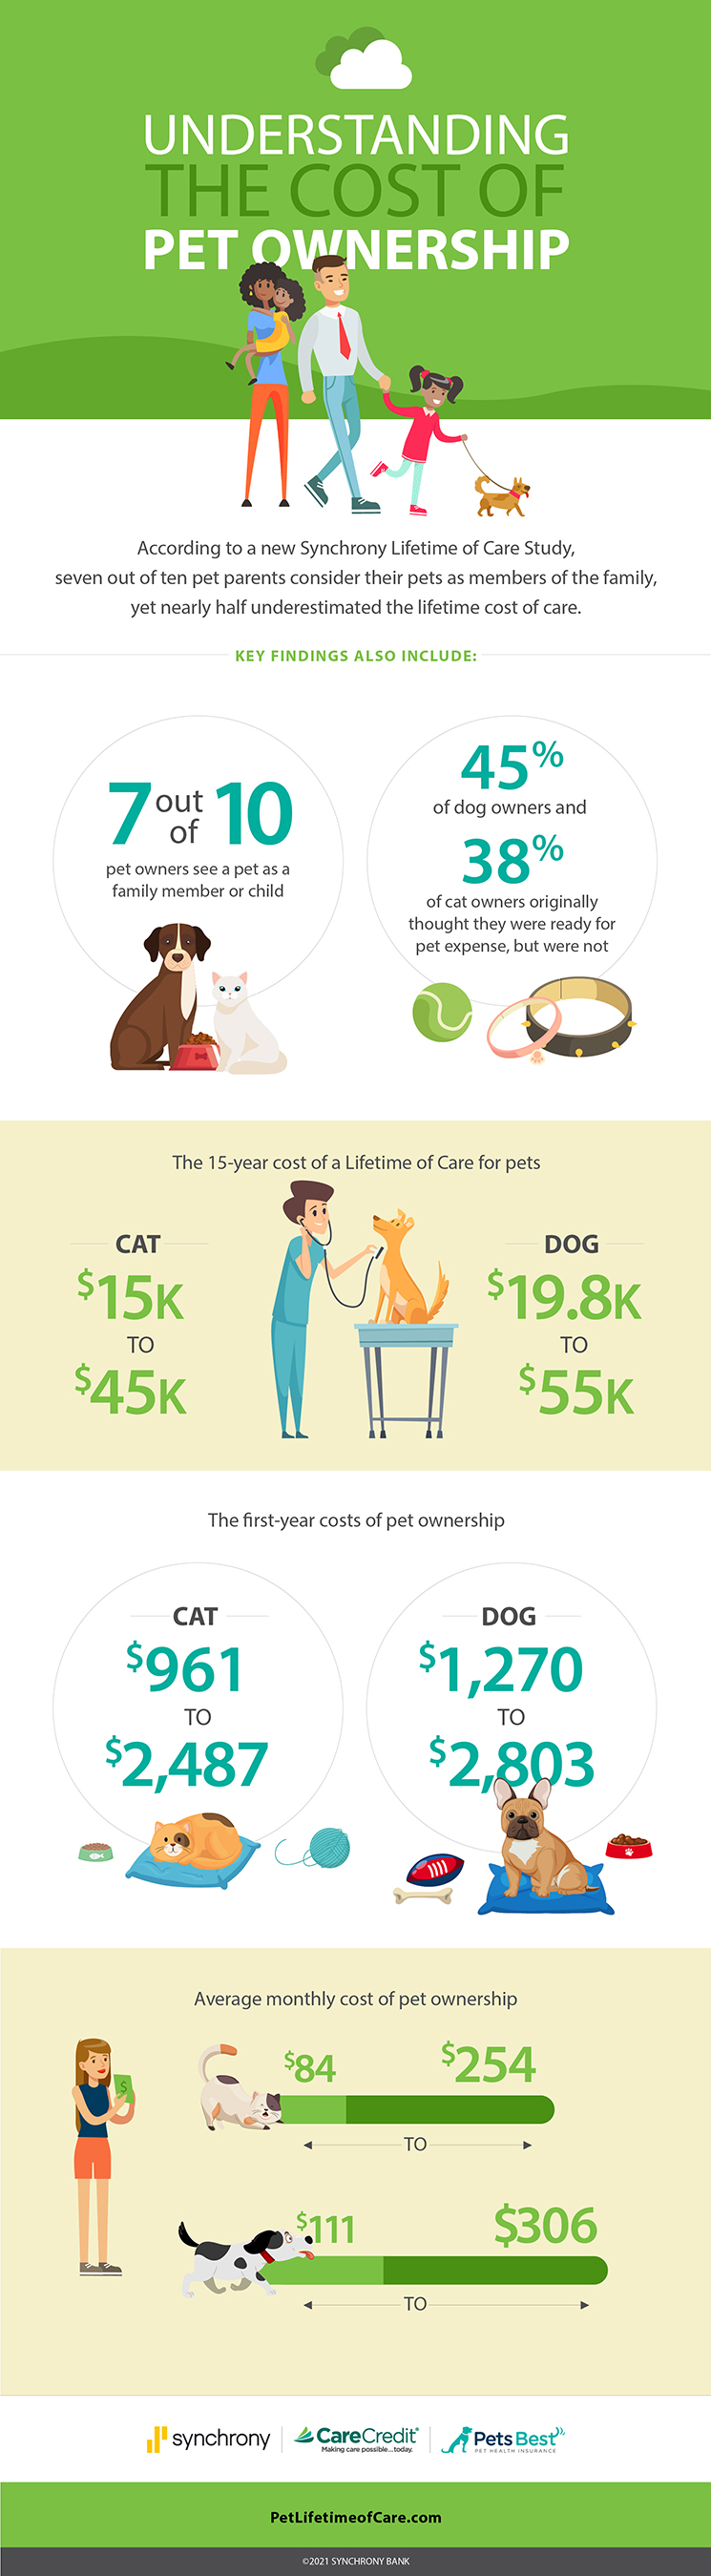 According to Synchrony’s “Lifetime of Care” Study,
seven out of ten pet parents consider their pets as members of the family, yet nearly half underestimated the lifetime cost of pet care.